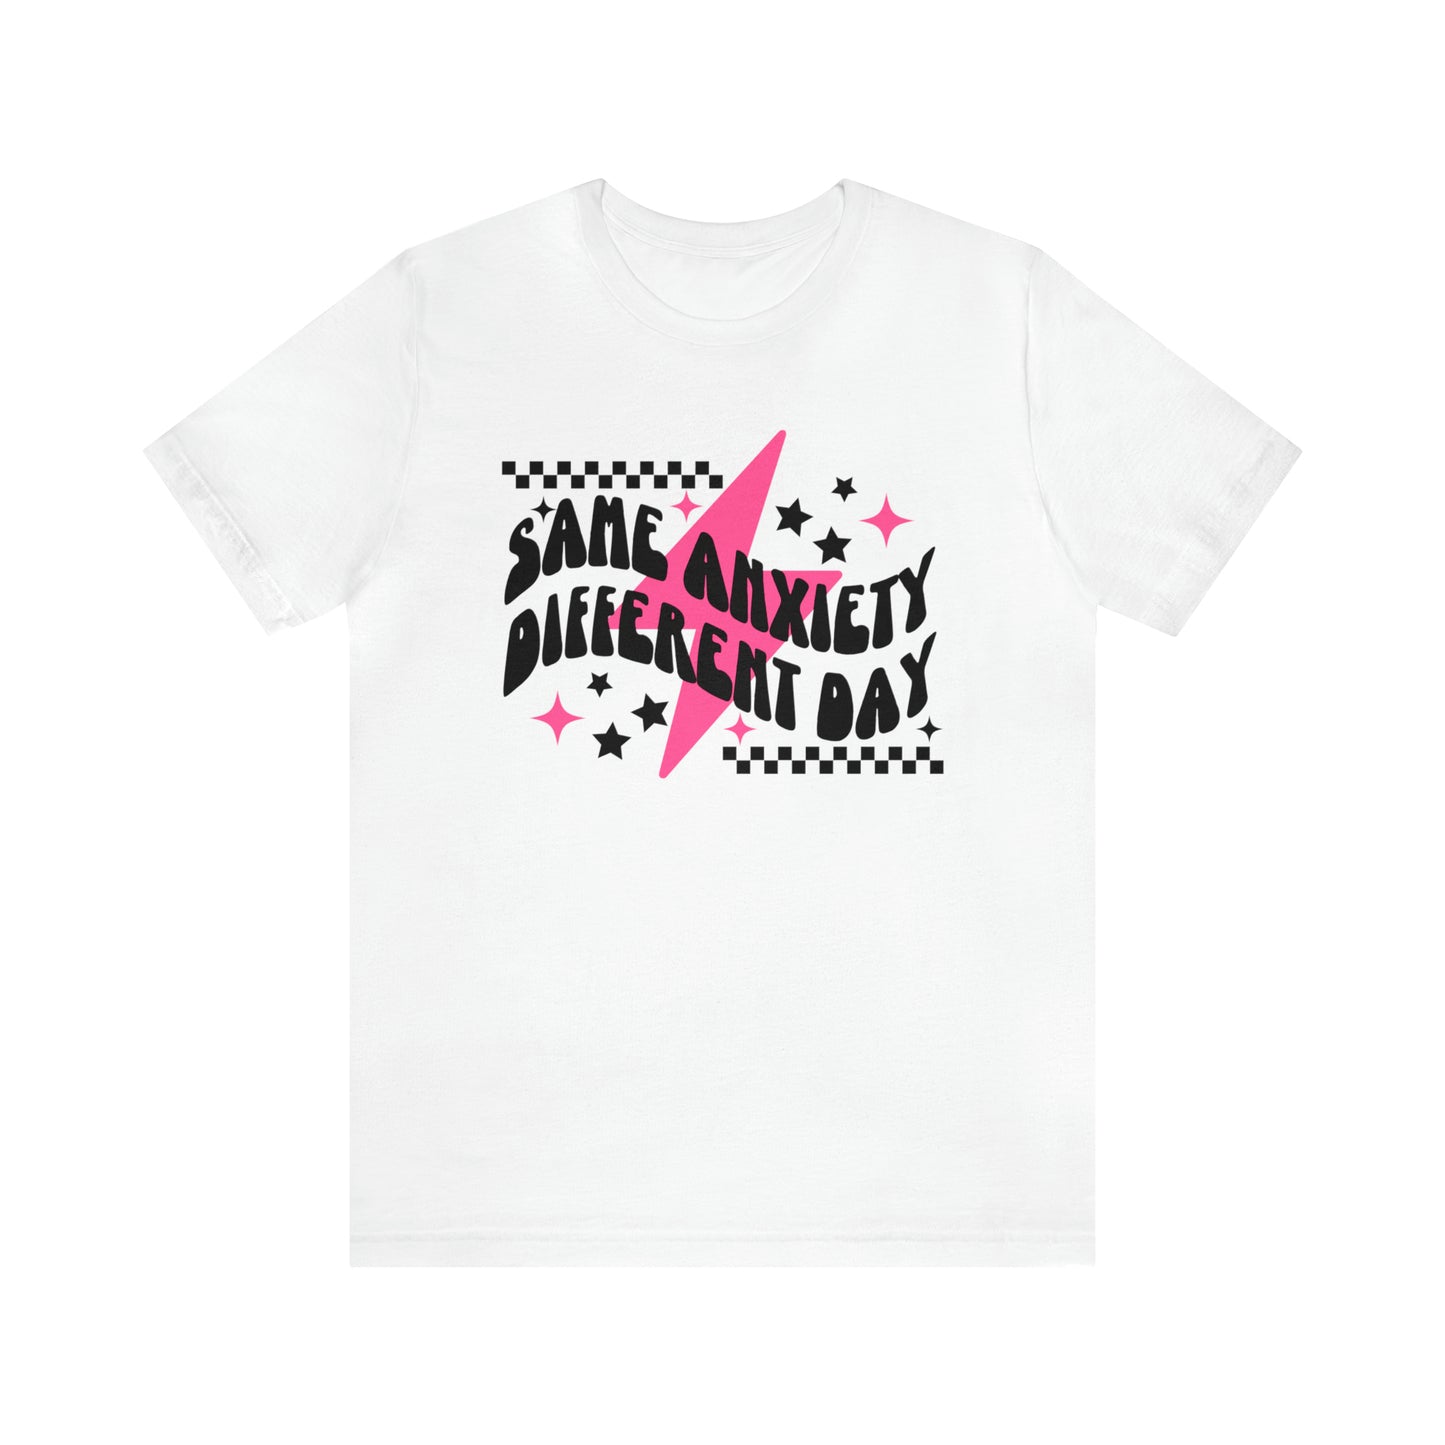 "Same Anxiety, Different Day" Unisex Short Sleeve Tee Bella Canvas